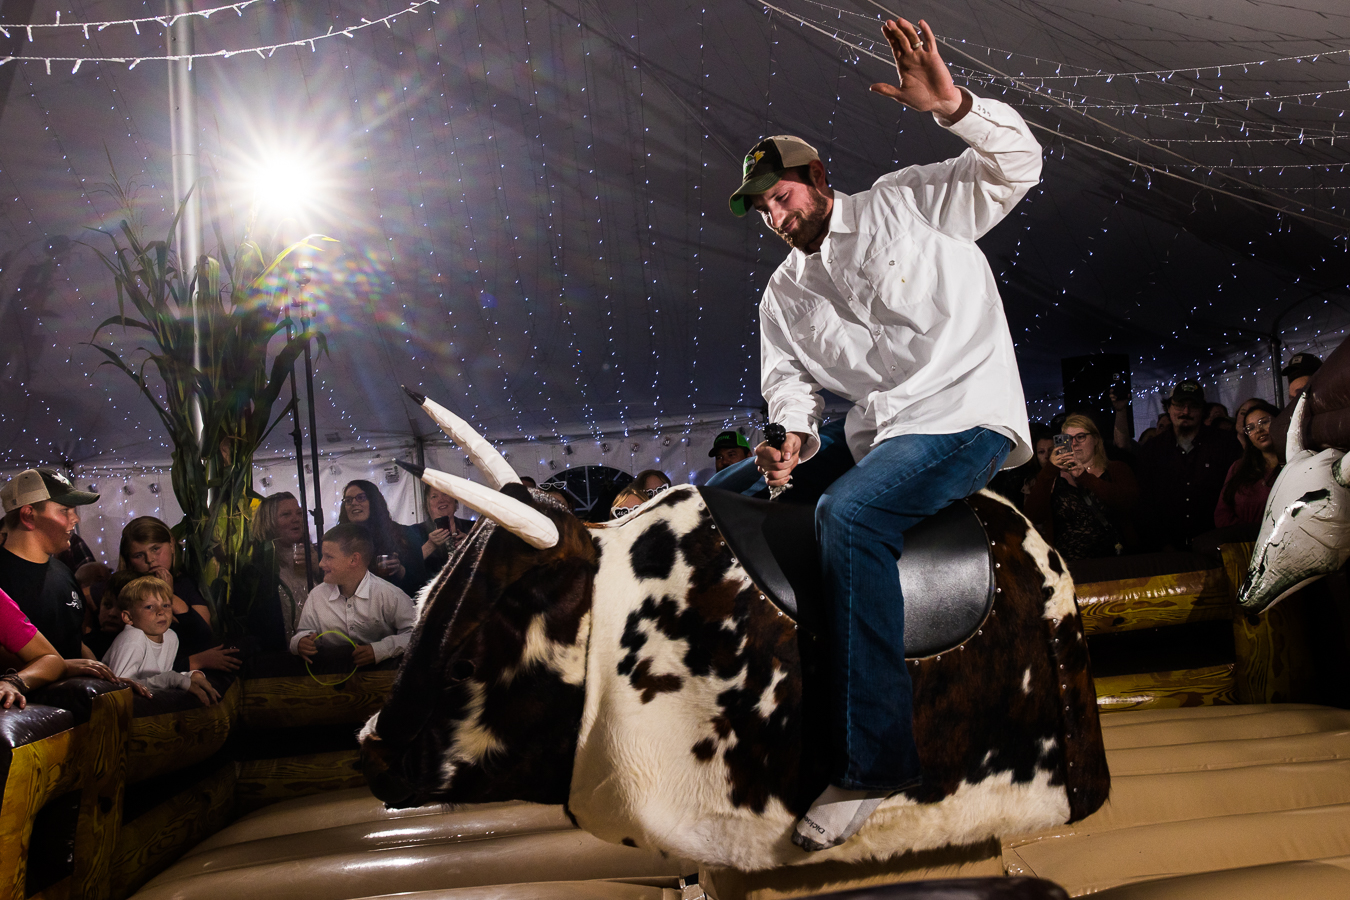 fun, candid image of the groom during this wild country wedding reception as he rides the mechanical bull at their country inspired wedding reception in halifax pa 